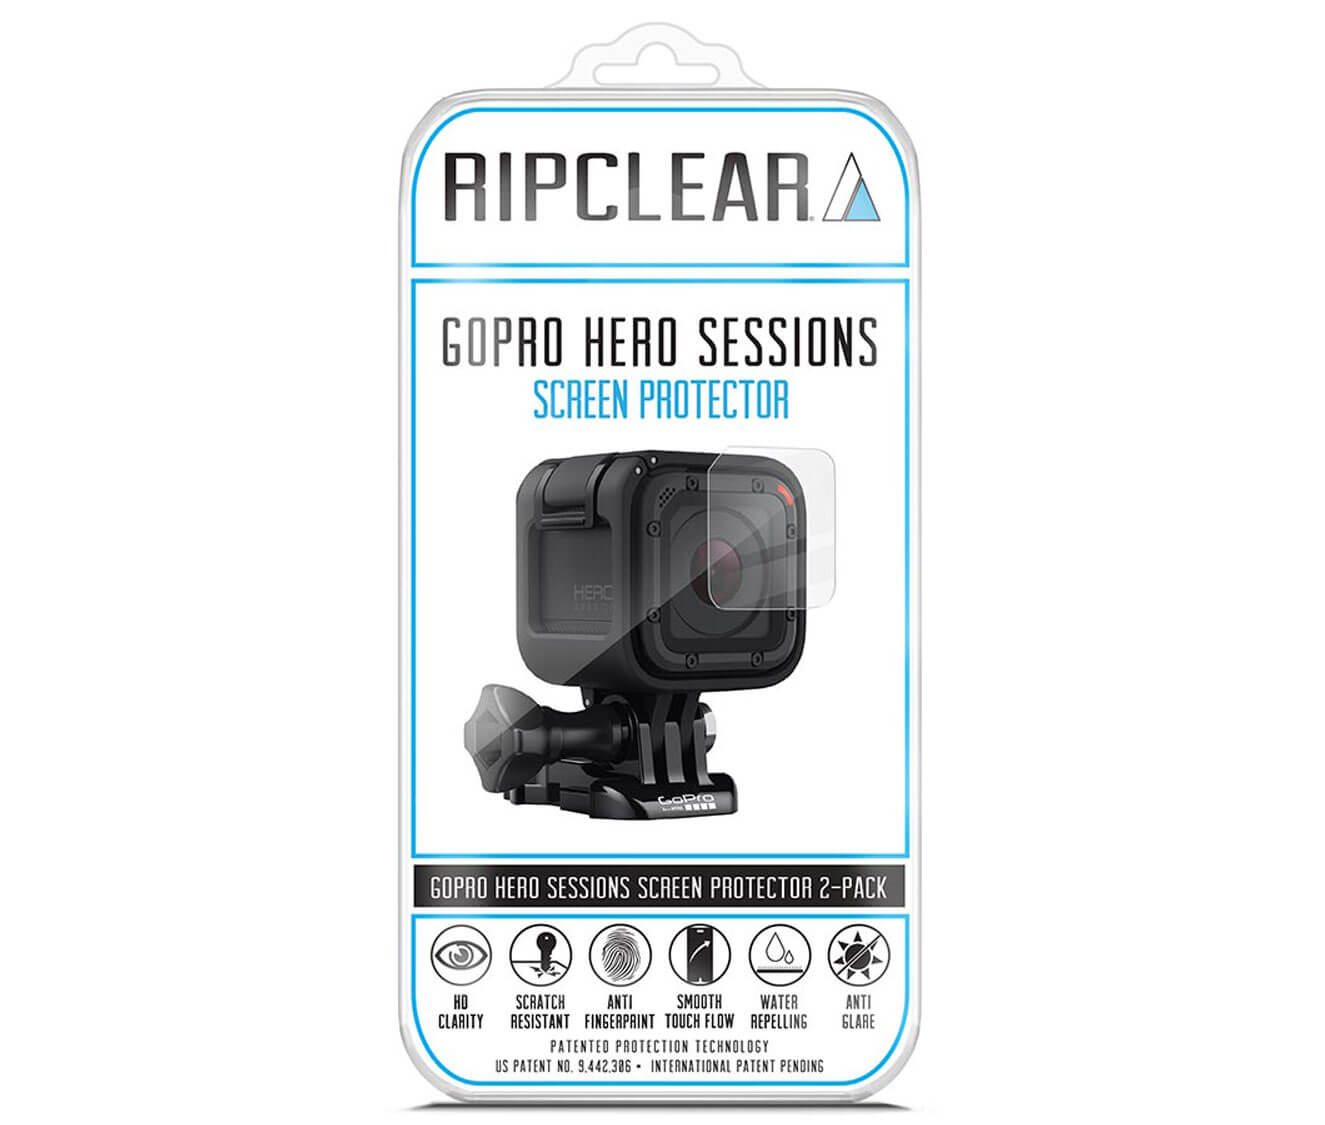 Ripclear GoPro Hero Session Screen Protector